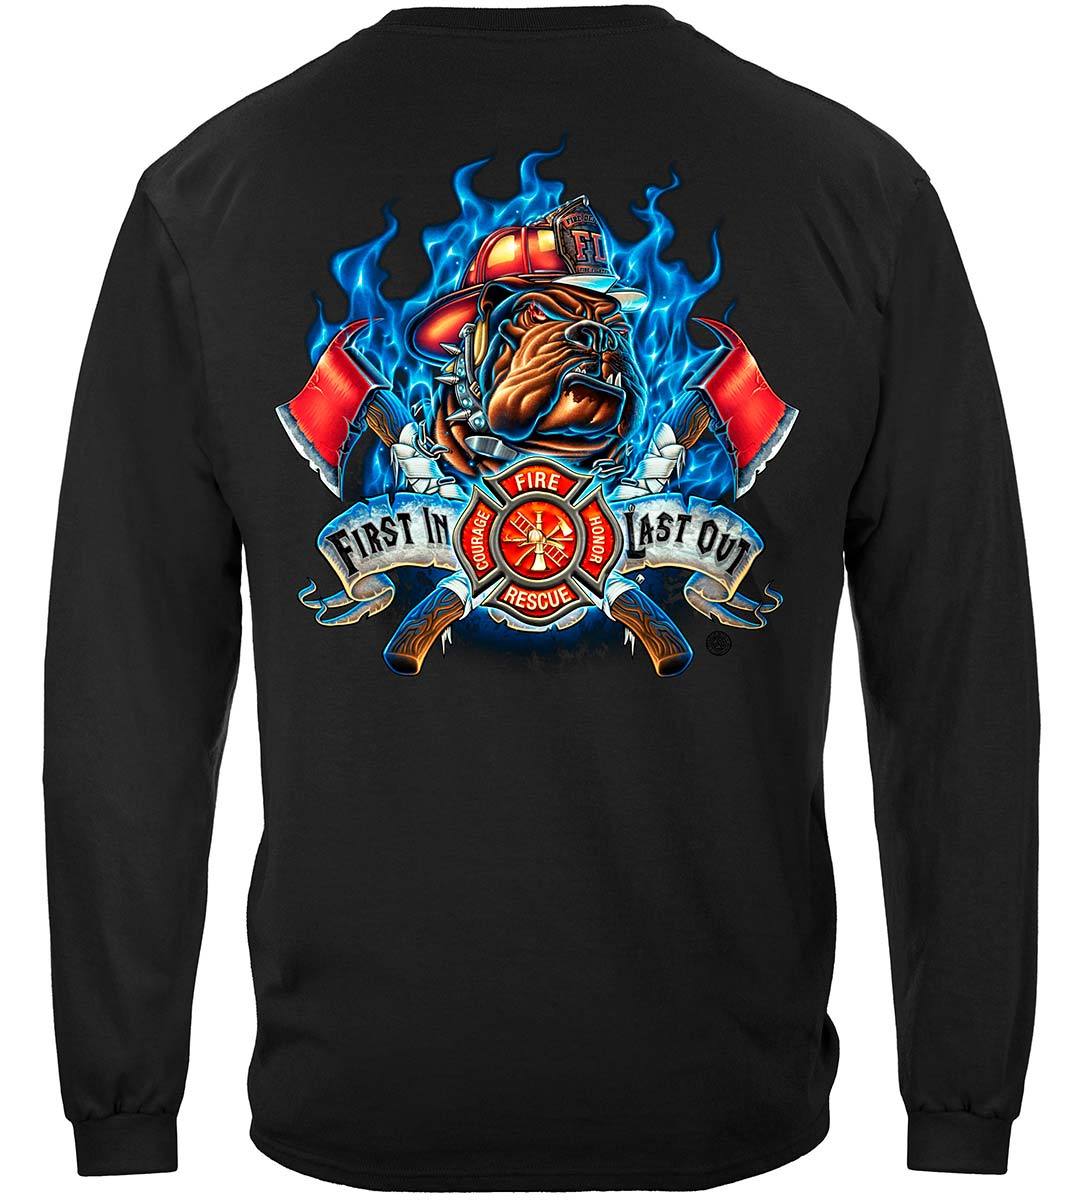 Firefighter Fire Dog First in Last Out Premium Hooded Sweat Shirt